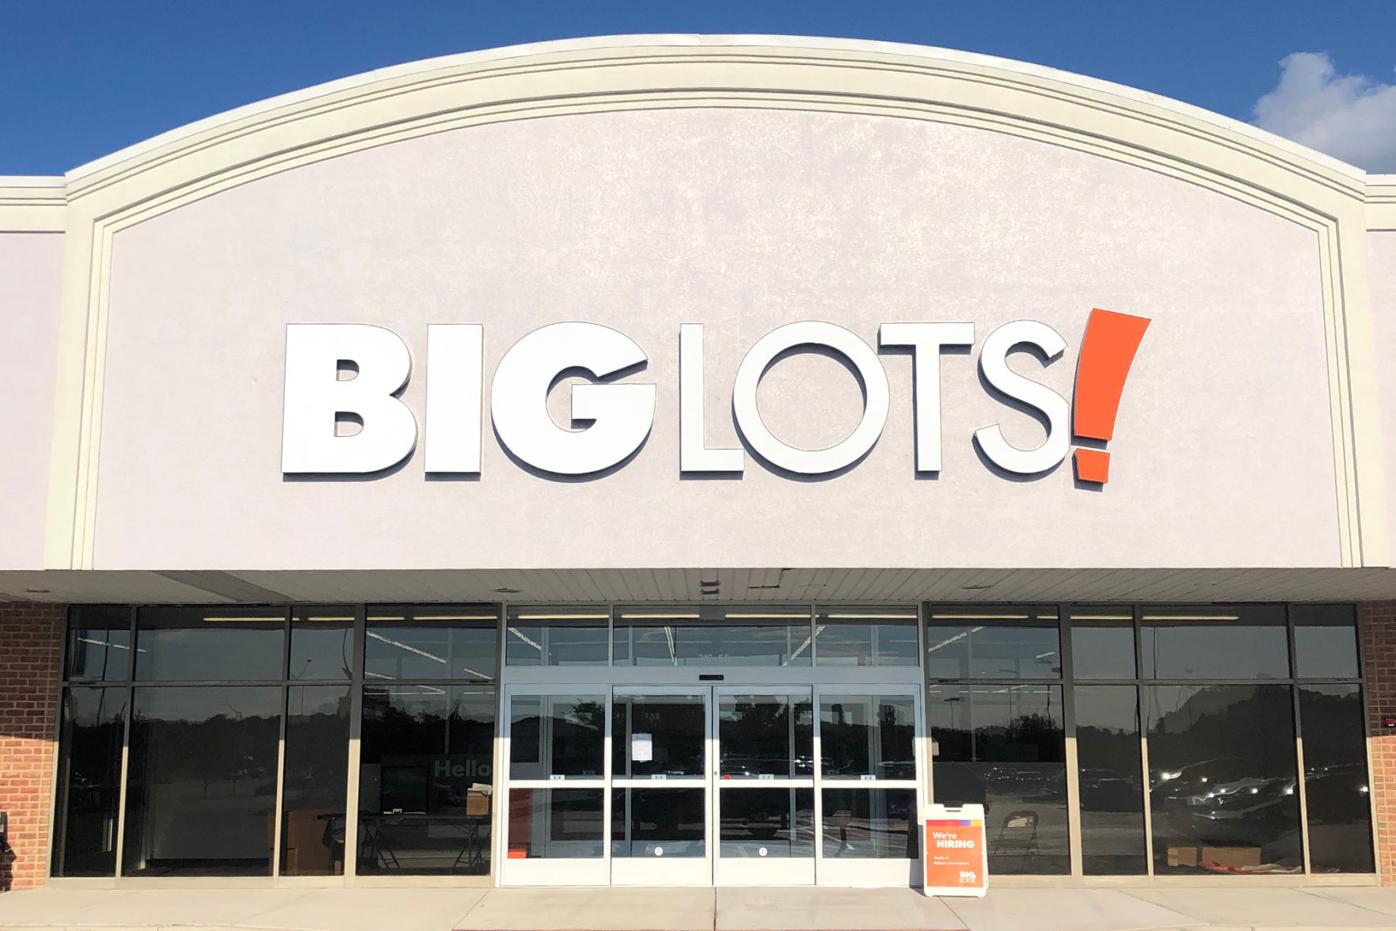 Big Lots New Headquarters Offers More Worker Amenities Plus Room To Grow Business The Columbus Dispatch Columbus Oh